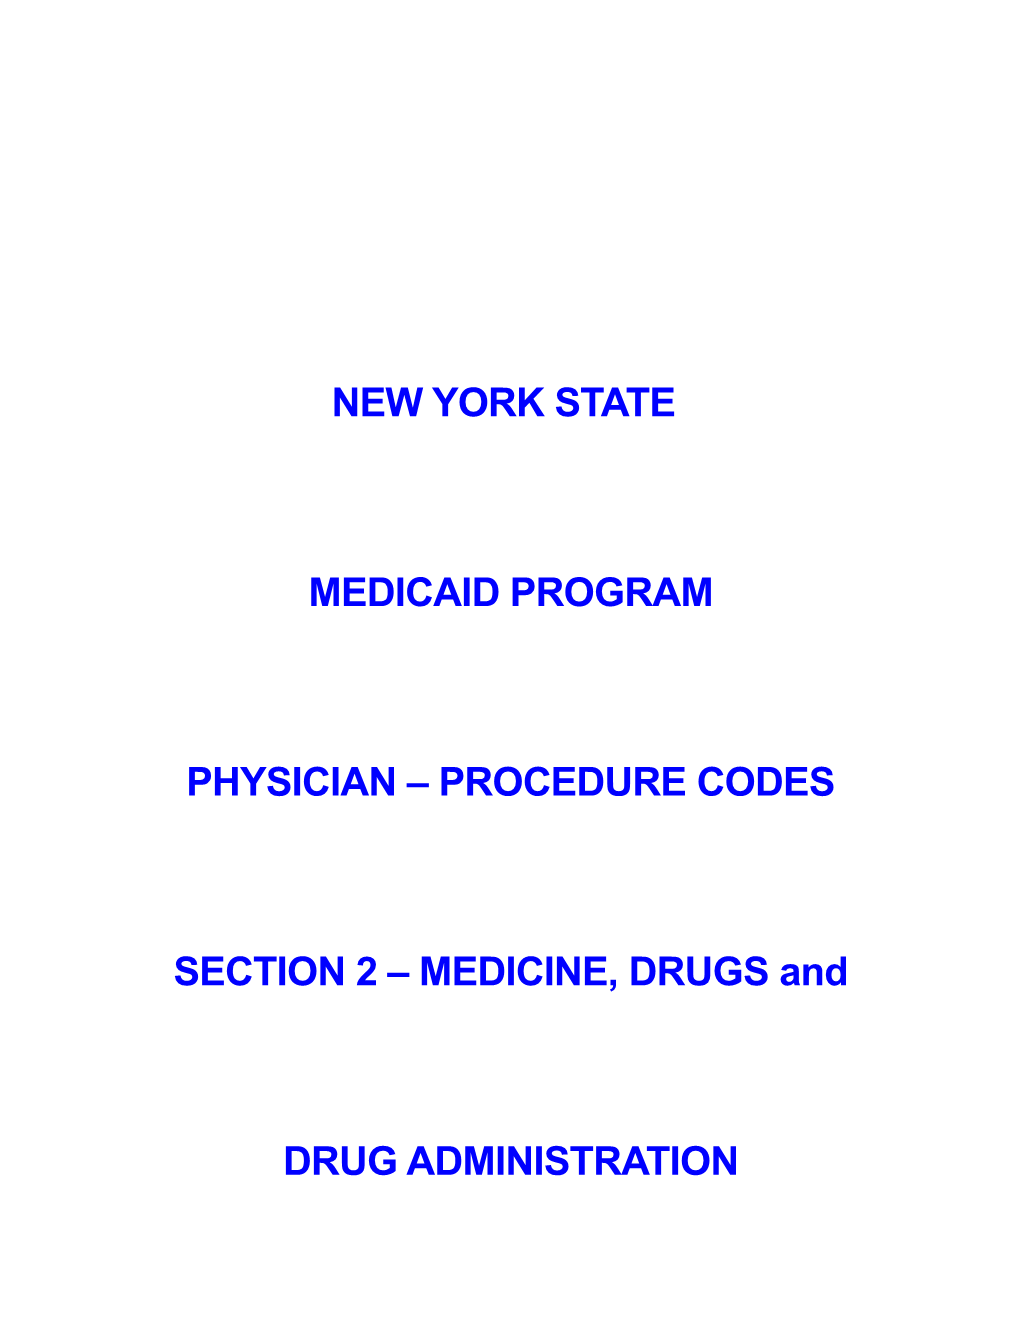 PROCEDURE CODES SECTION 2 – MEDICINE, DRUGS And